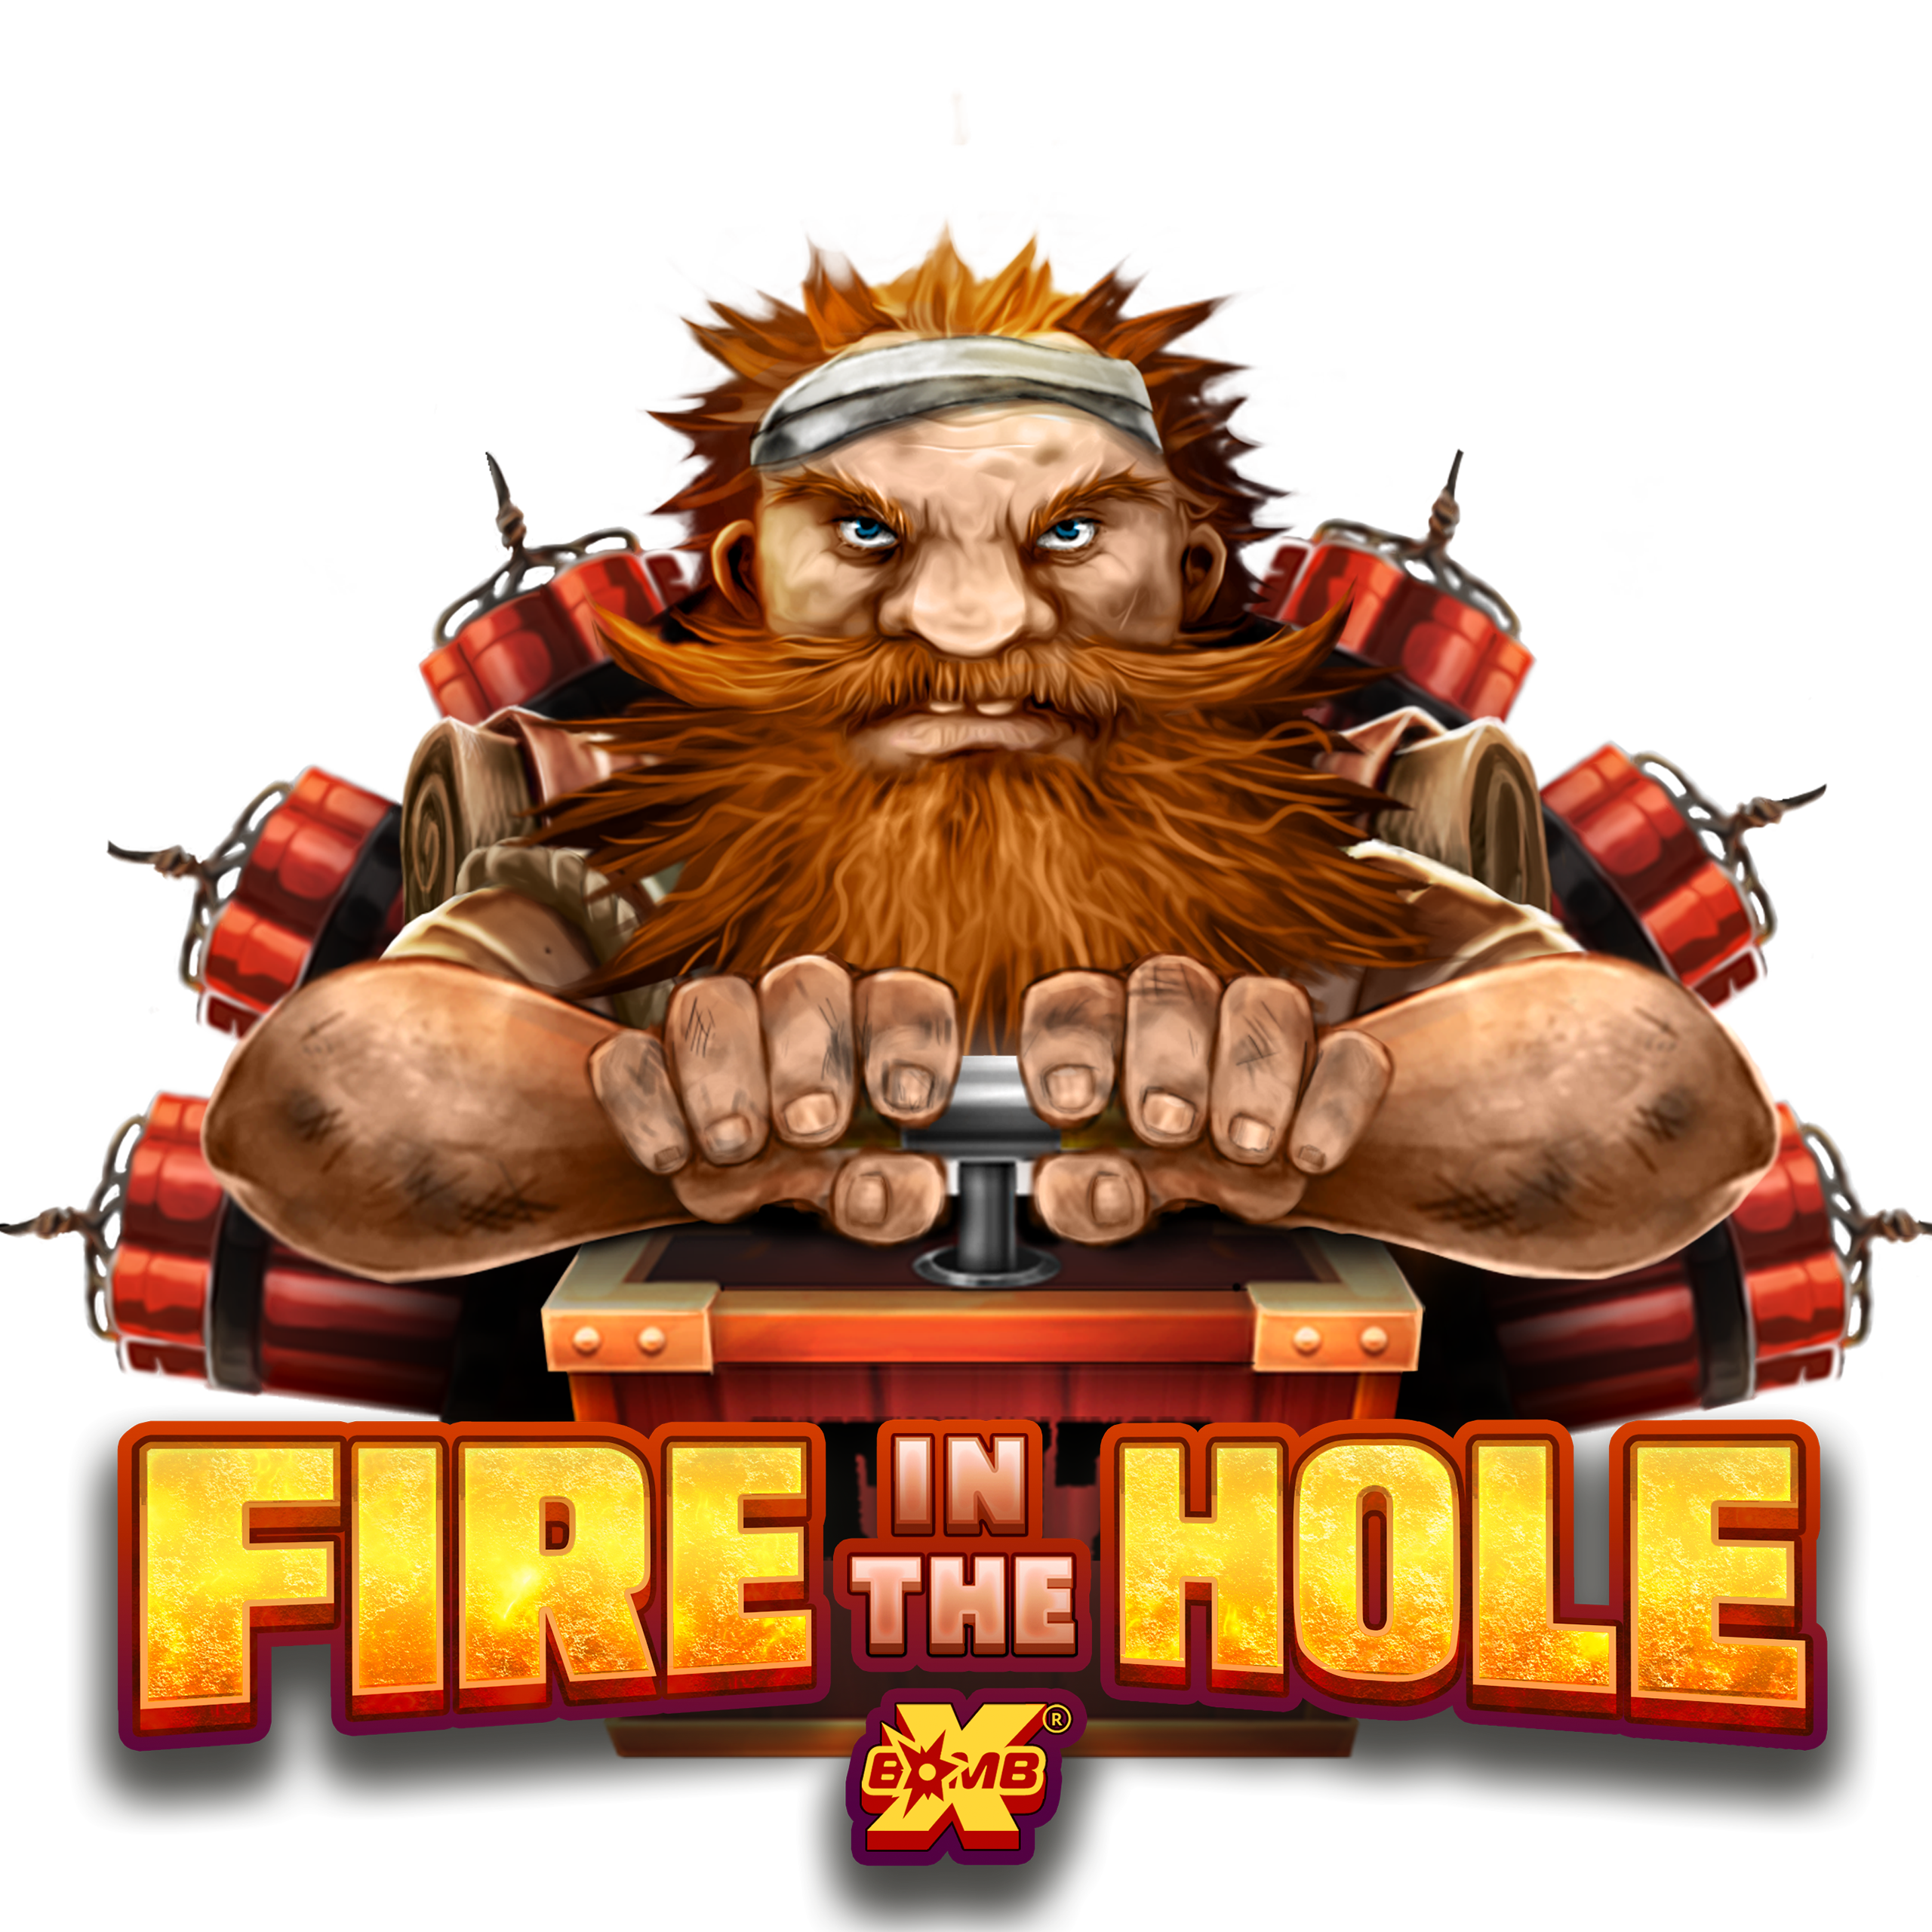 Fire hole слот. Fire in the hole казино. Fire in the hole XBOMB. Fire in the hole Slot.